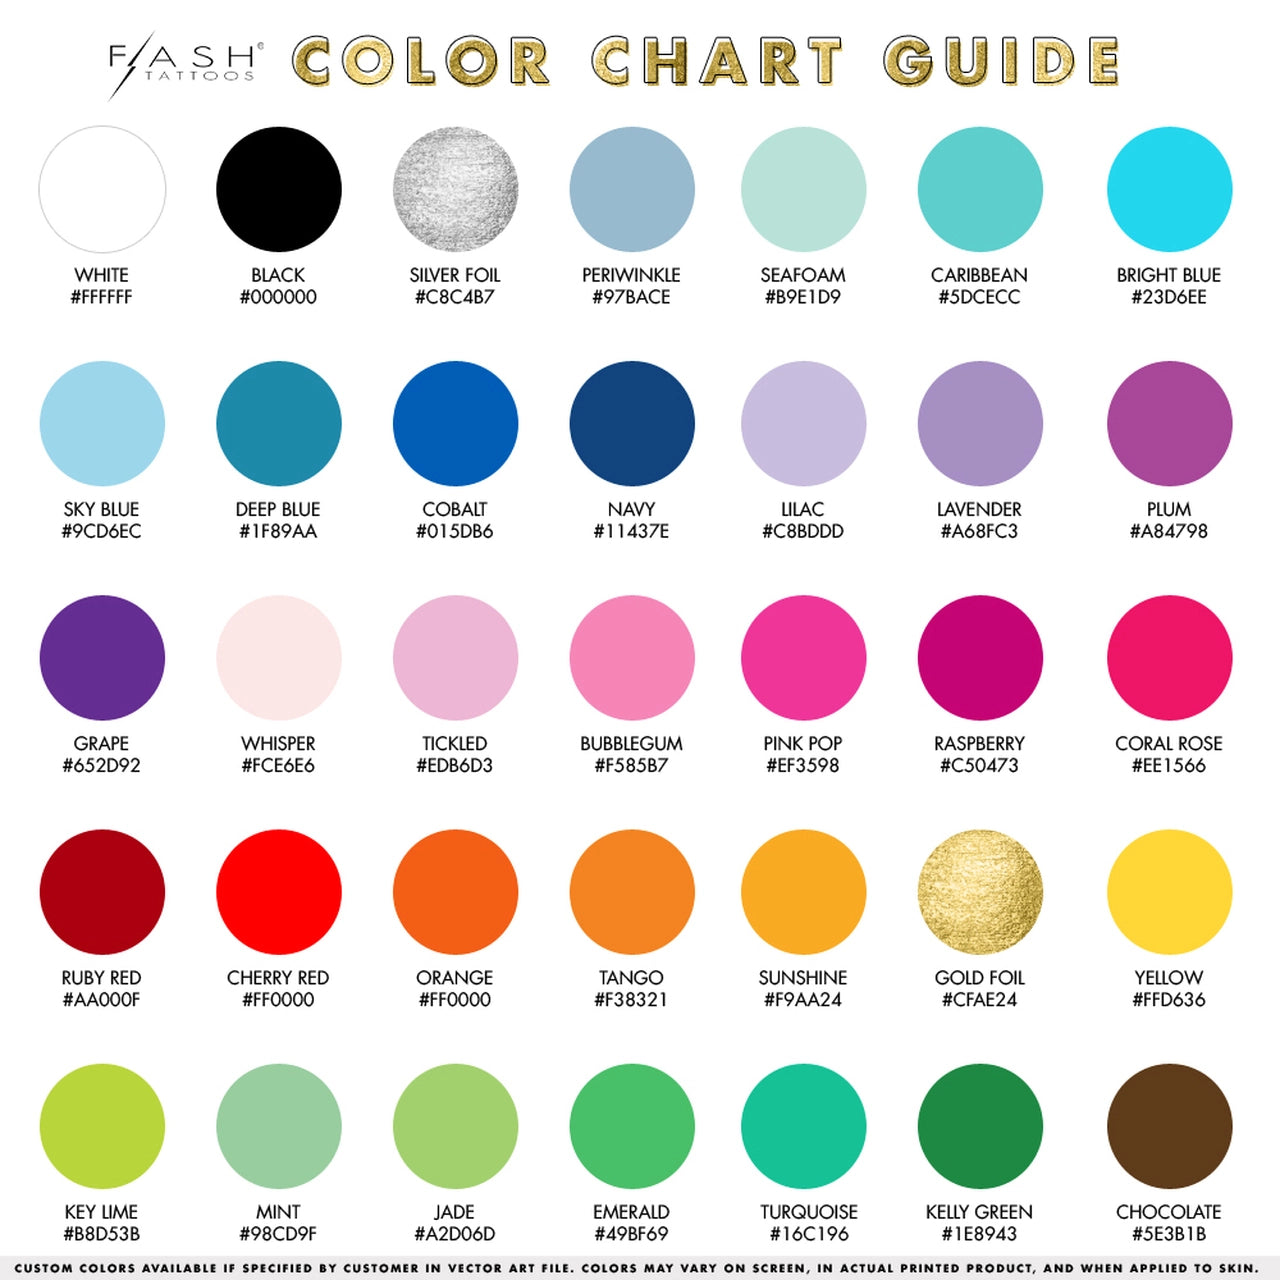 Color chart guide for custom tattoos - order a sample now! #FLASHTAT @FlashTattoos